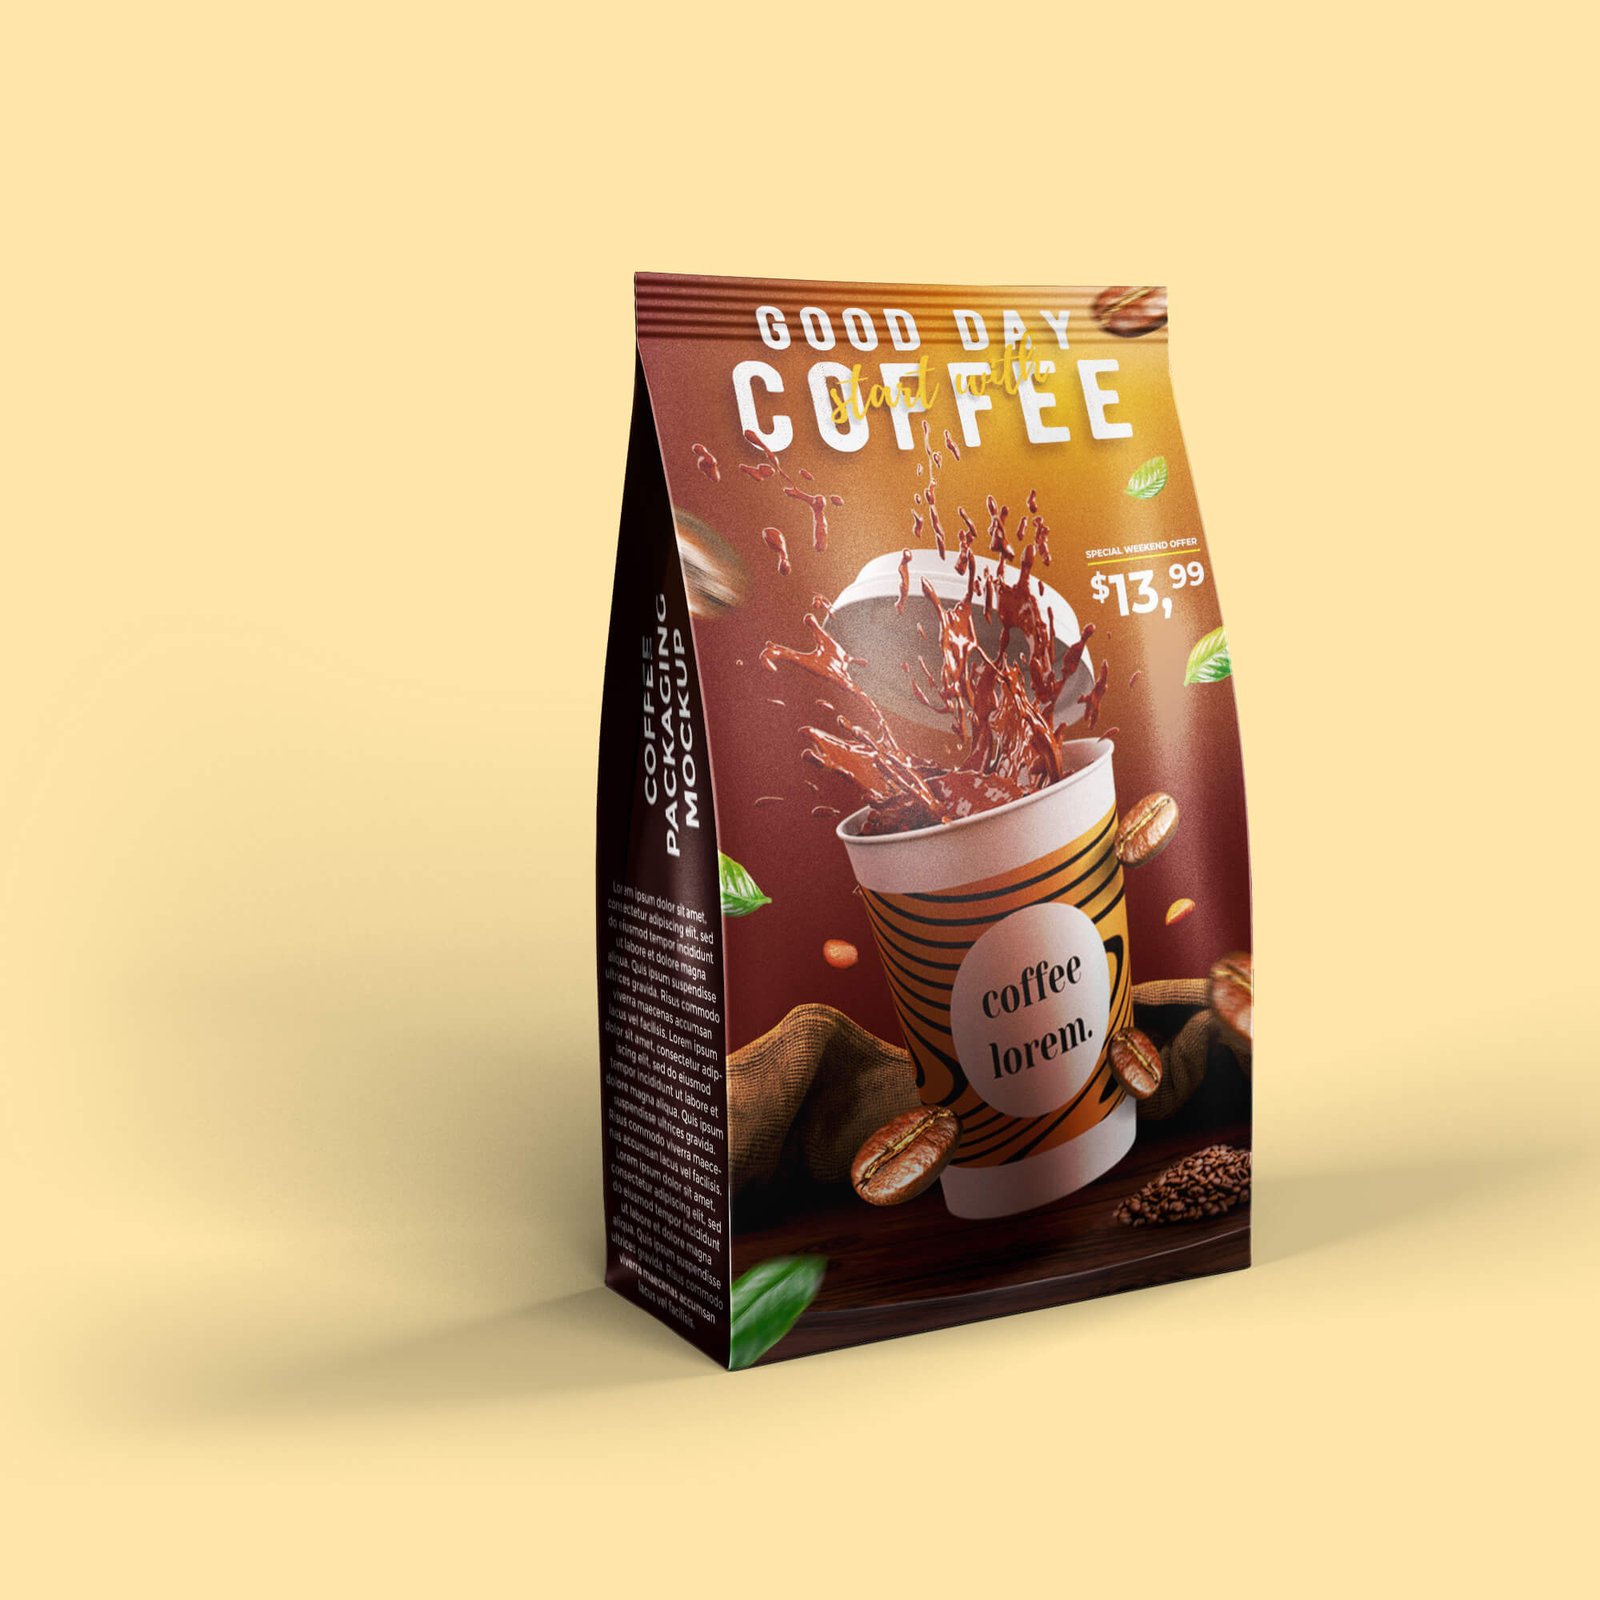 Design Free Coffee Packaging Mockup PSD Template (1)